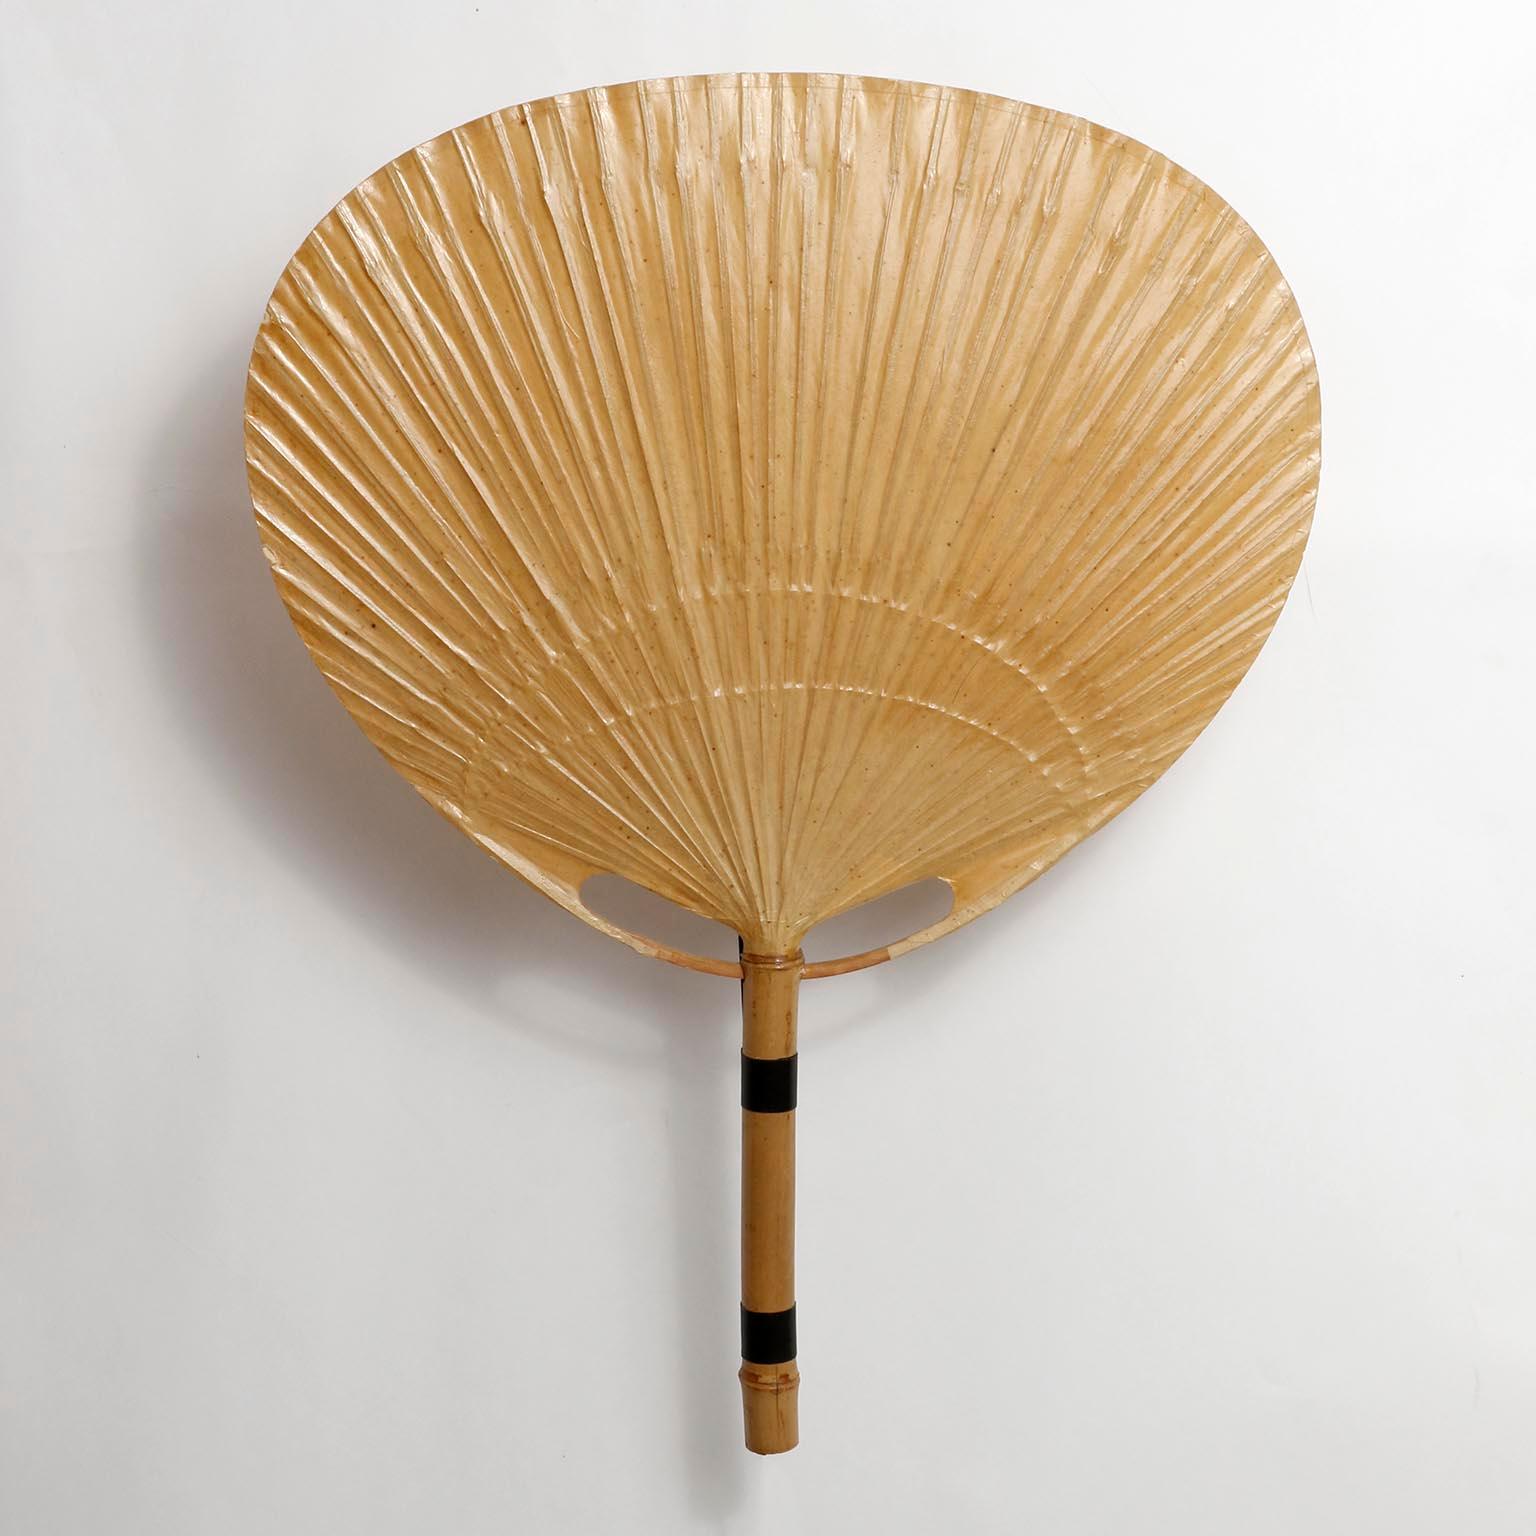 A pair of ‘Uchiwa’ wall light fixtures with large rice paper palm shaped leaves connected to a bamboo shaft by Ingo Maurer, Germany, 1970s.
This lamp was handmade of bamboo and Japanese rice paper in 1977.
Ingo Maurer’s interest in paper for